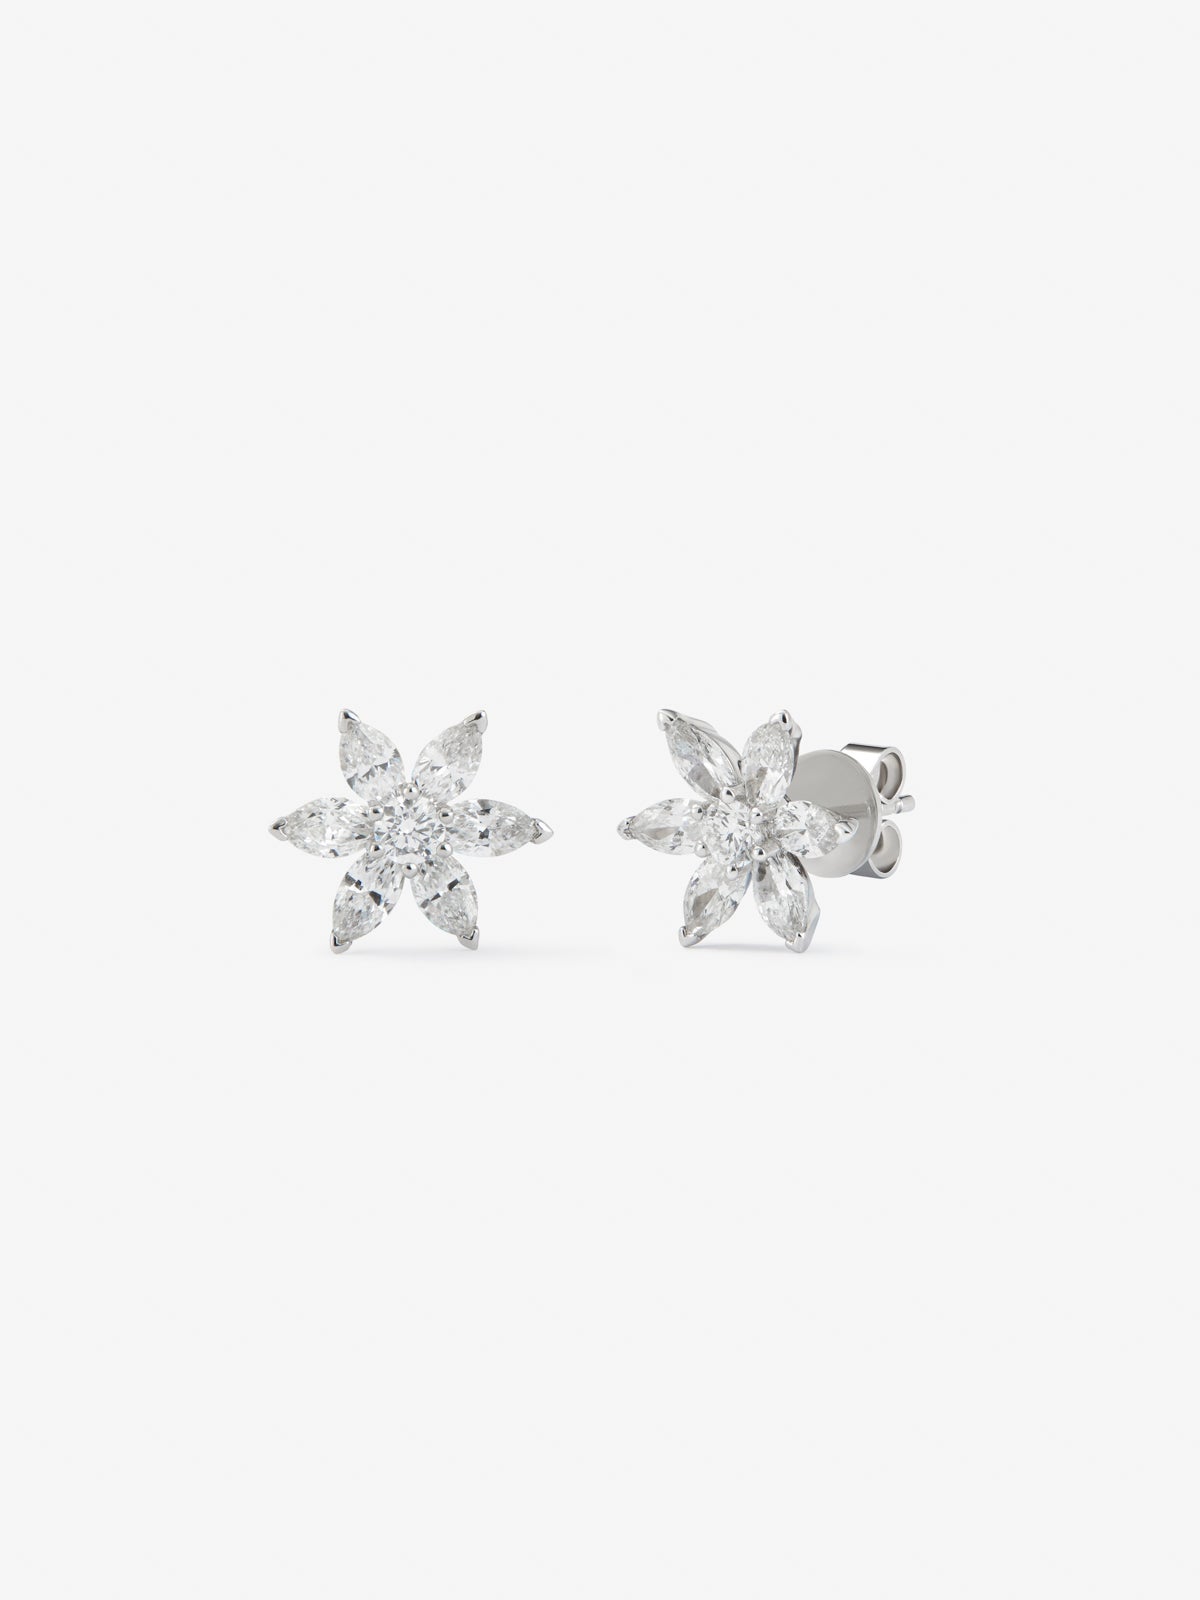 18K white gold earrings with 2 brilliant-cut diamonds with a total of 0.16 cts and 12 marquise-cut diamonds with a total of 1.06 cts